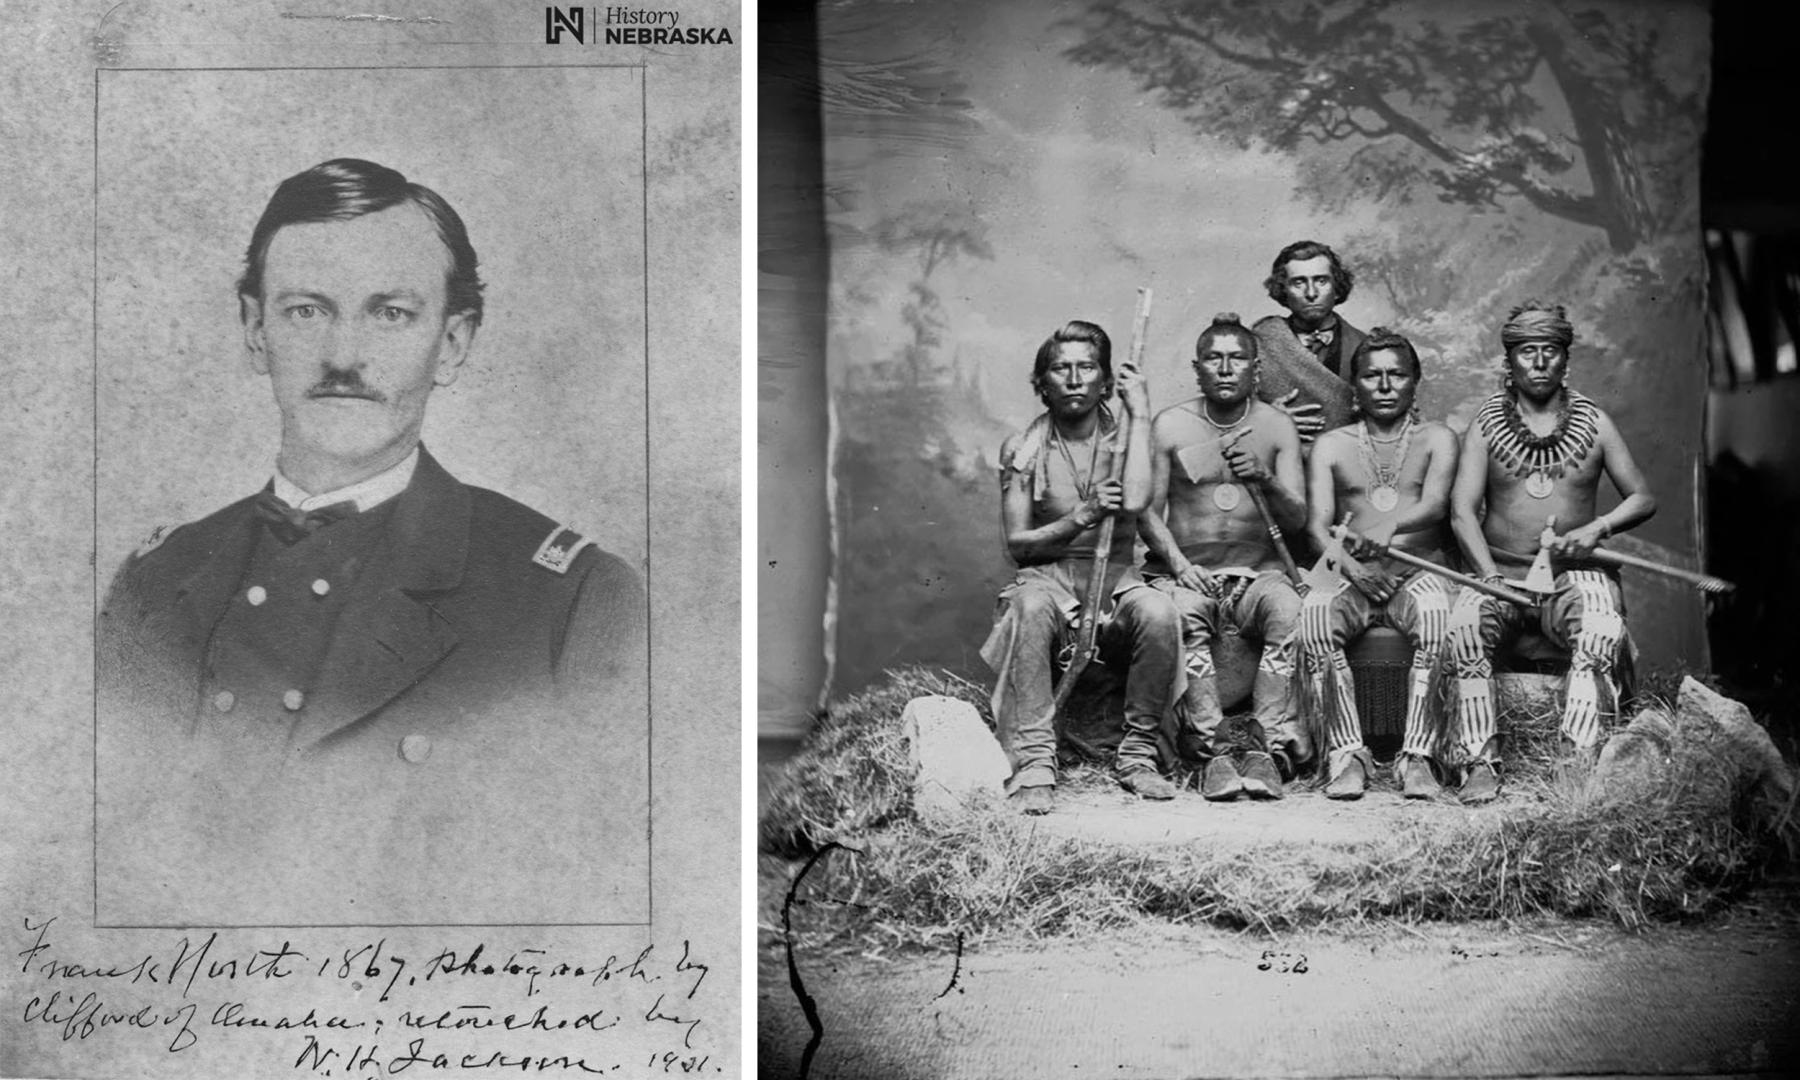 The same day the Cheyennes attacked the Sawyers Expedition on Bonepile Creek, Capt. Frank North, left, and some of his brigade of Pawnee Scouts attacked a Cheyenne camp near the confluence of Crazy Woman Creek and the Powder River. They killed 24 people. History Nebraska and Reddit. 